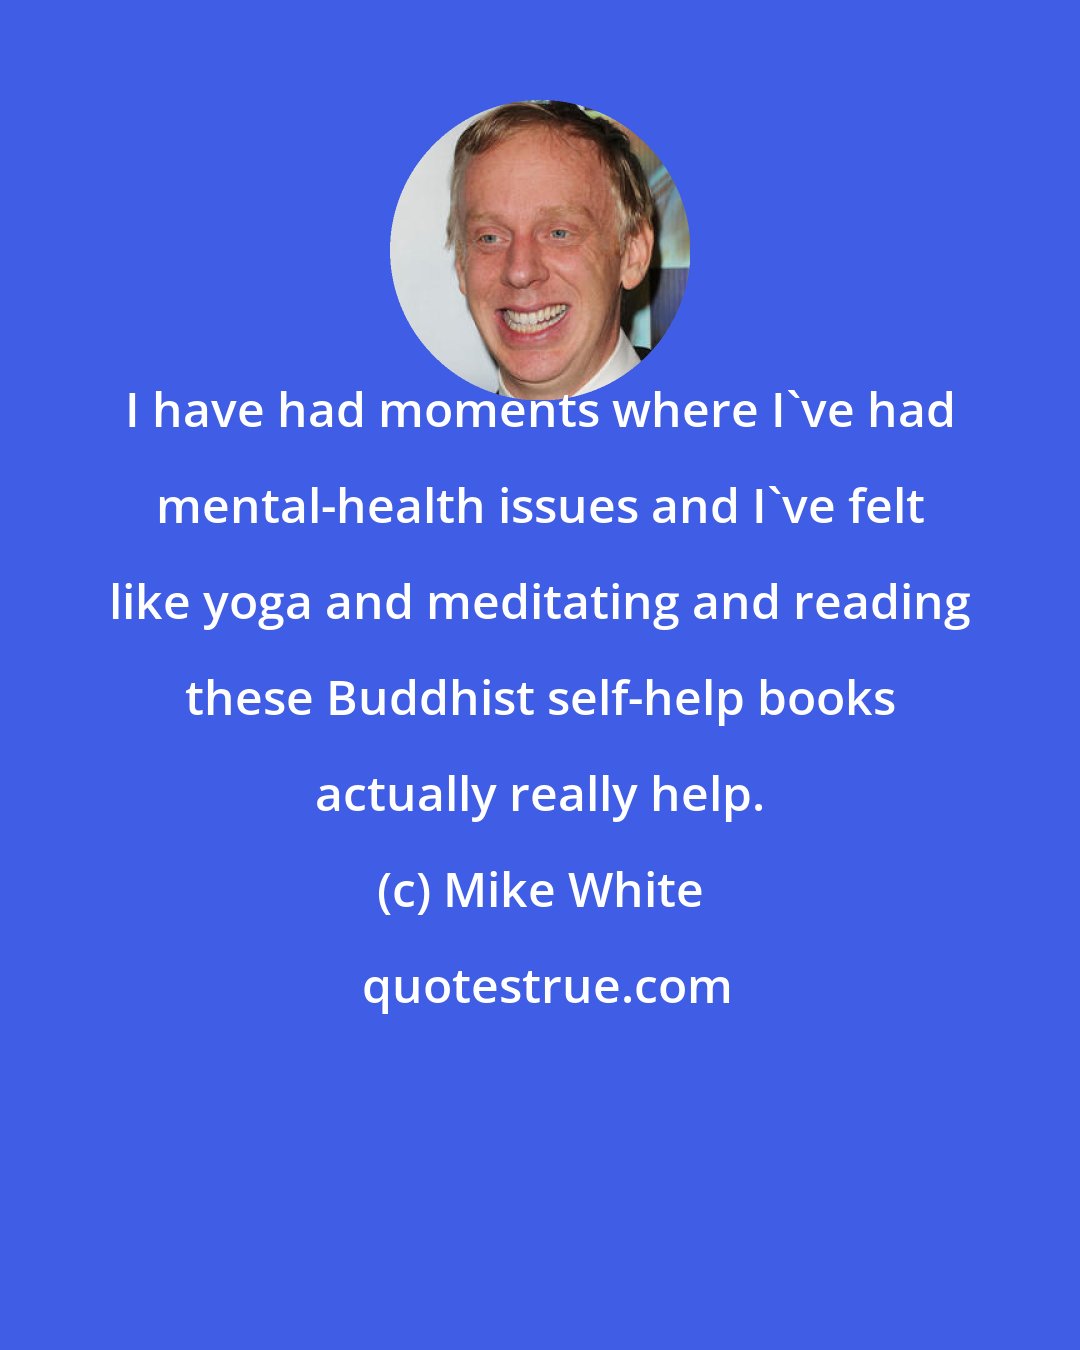 Mike White: I have had moments where I've had mental-health issues and I've felt like yoga and meditating and reading these Buddhist self-help books actually really help.